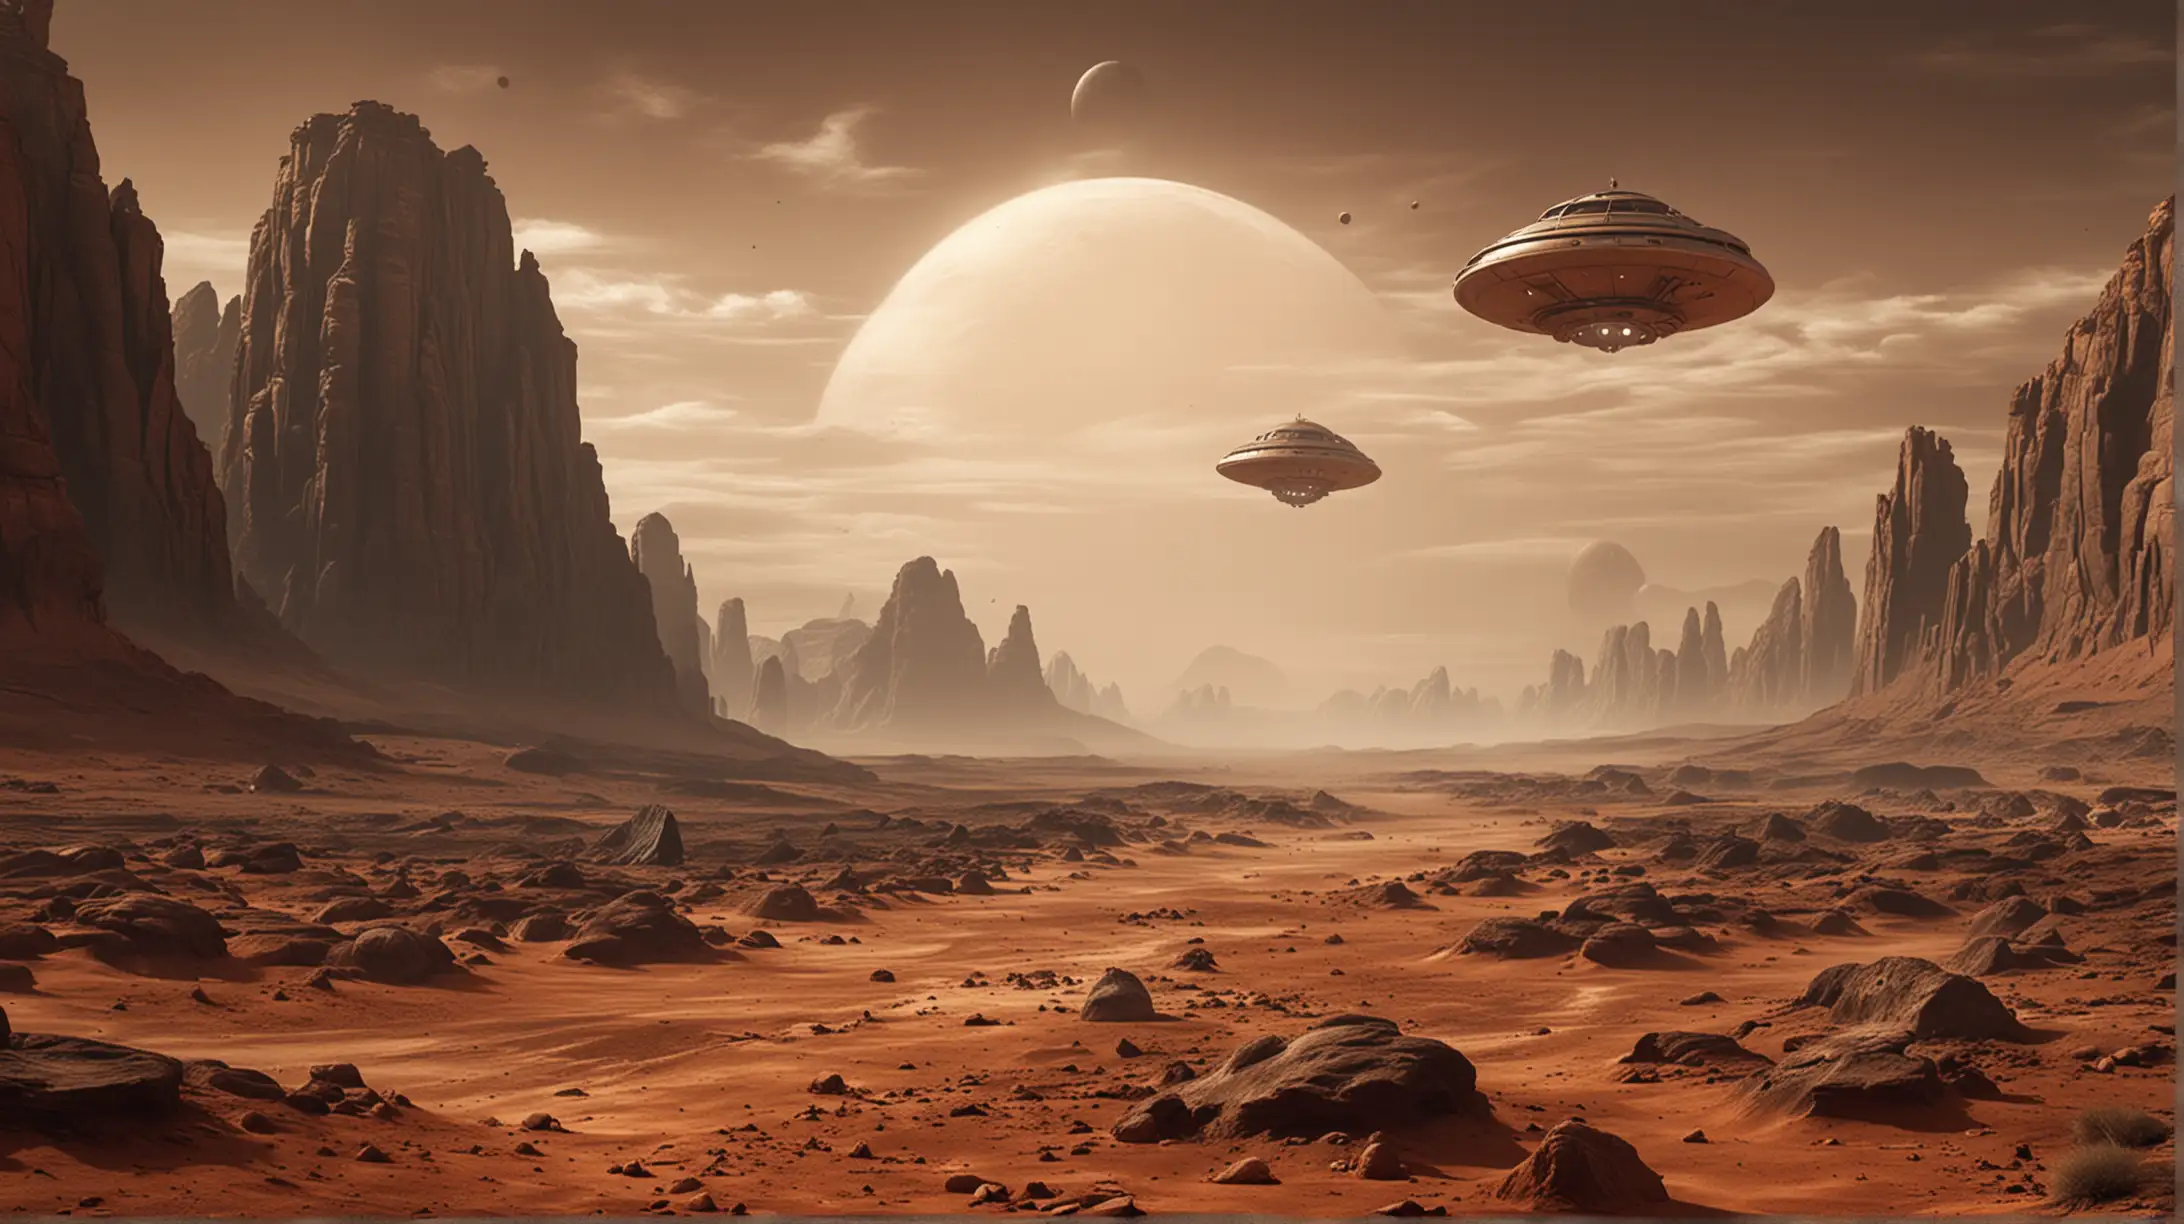 Mars Landscape with Steampunk Flying Saucers at Dusk